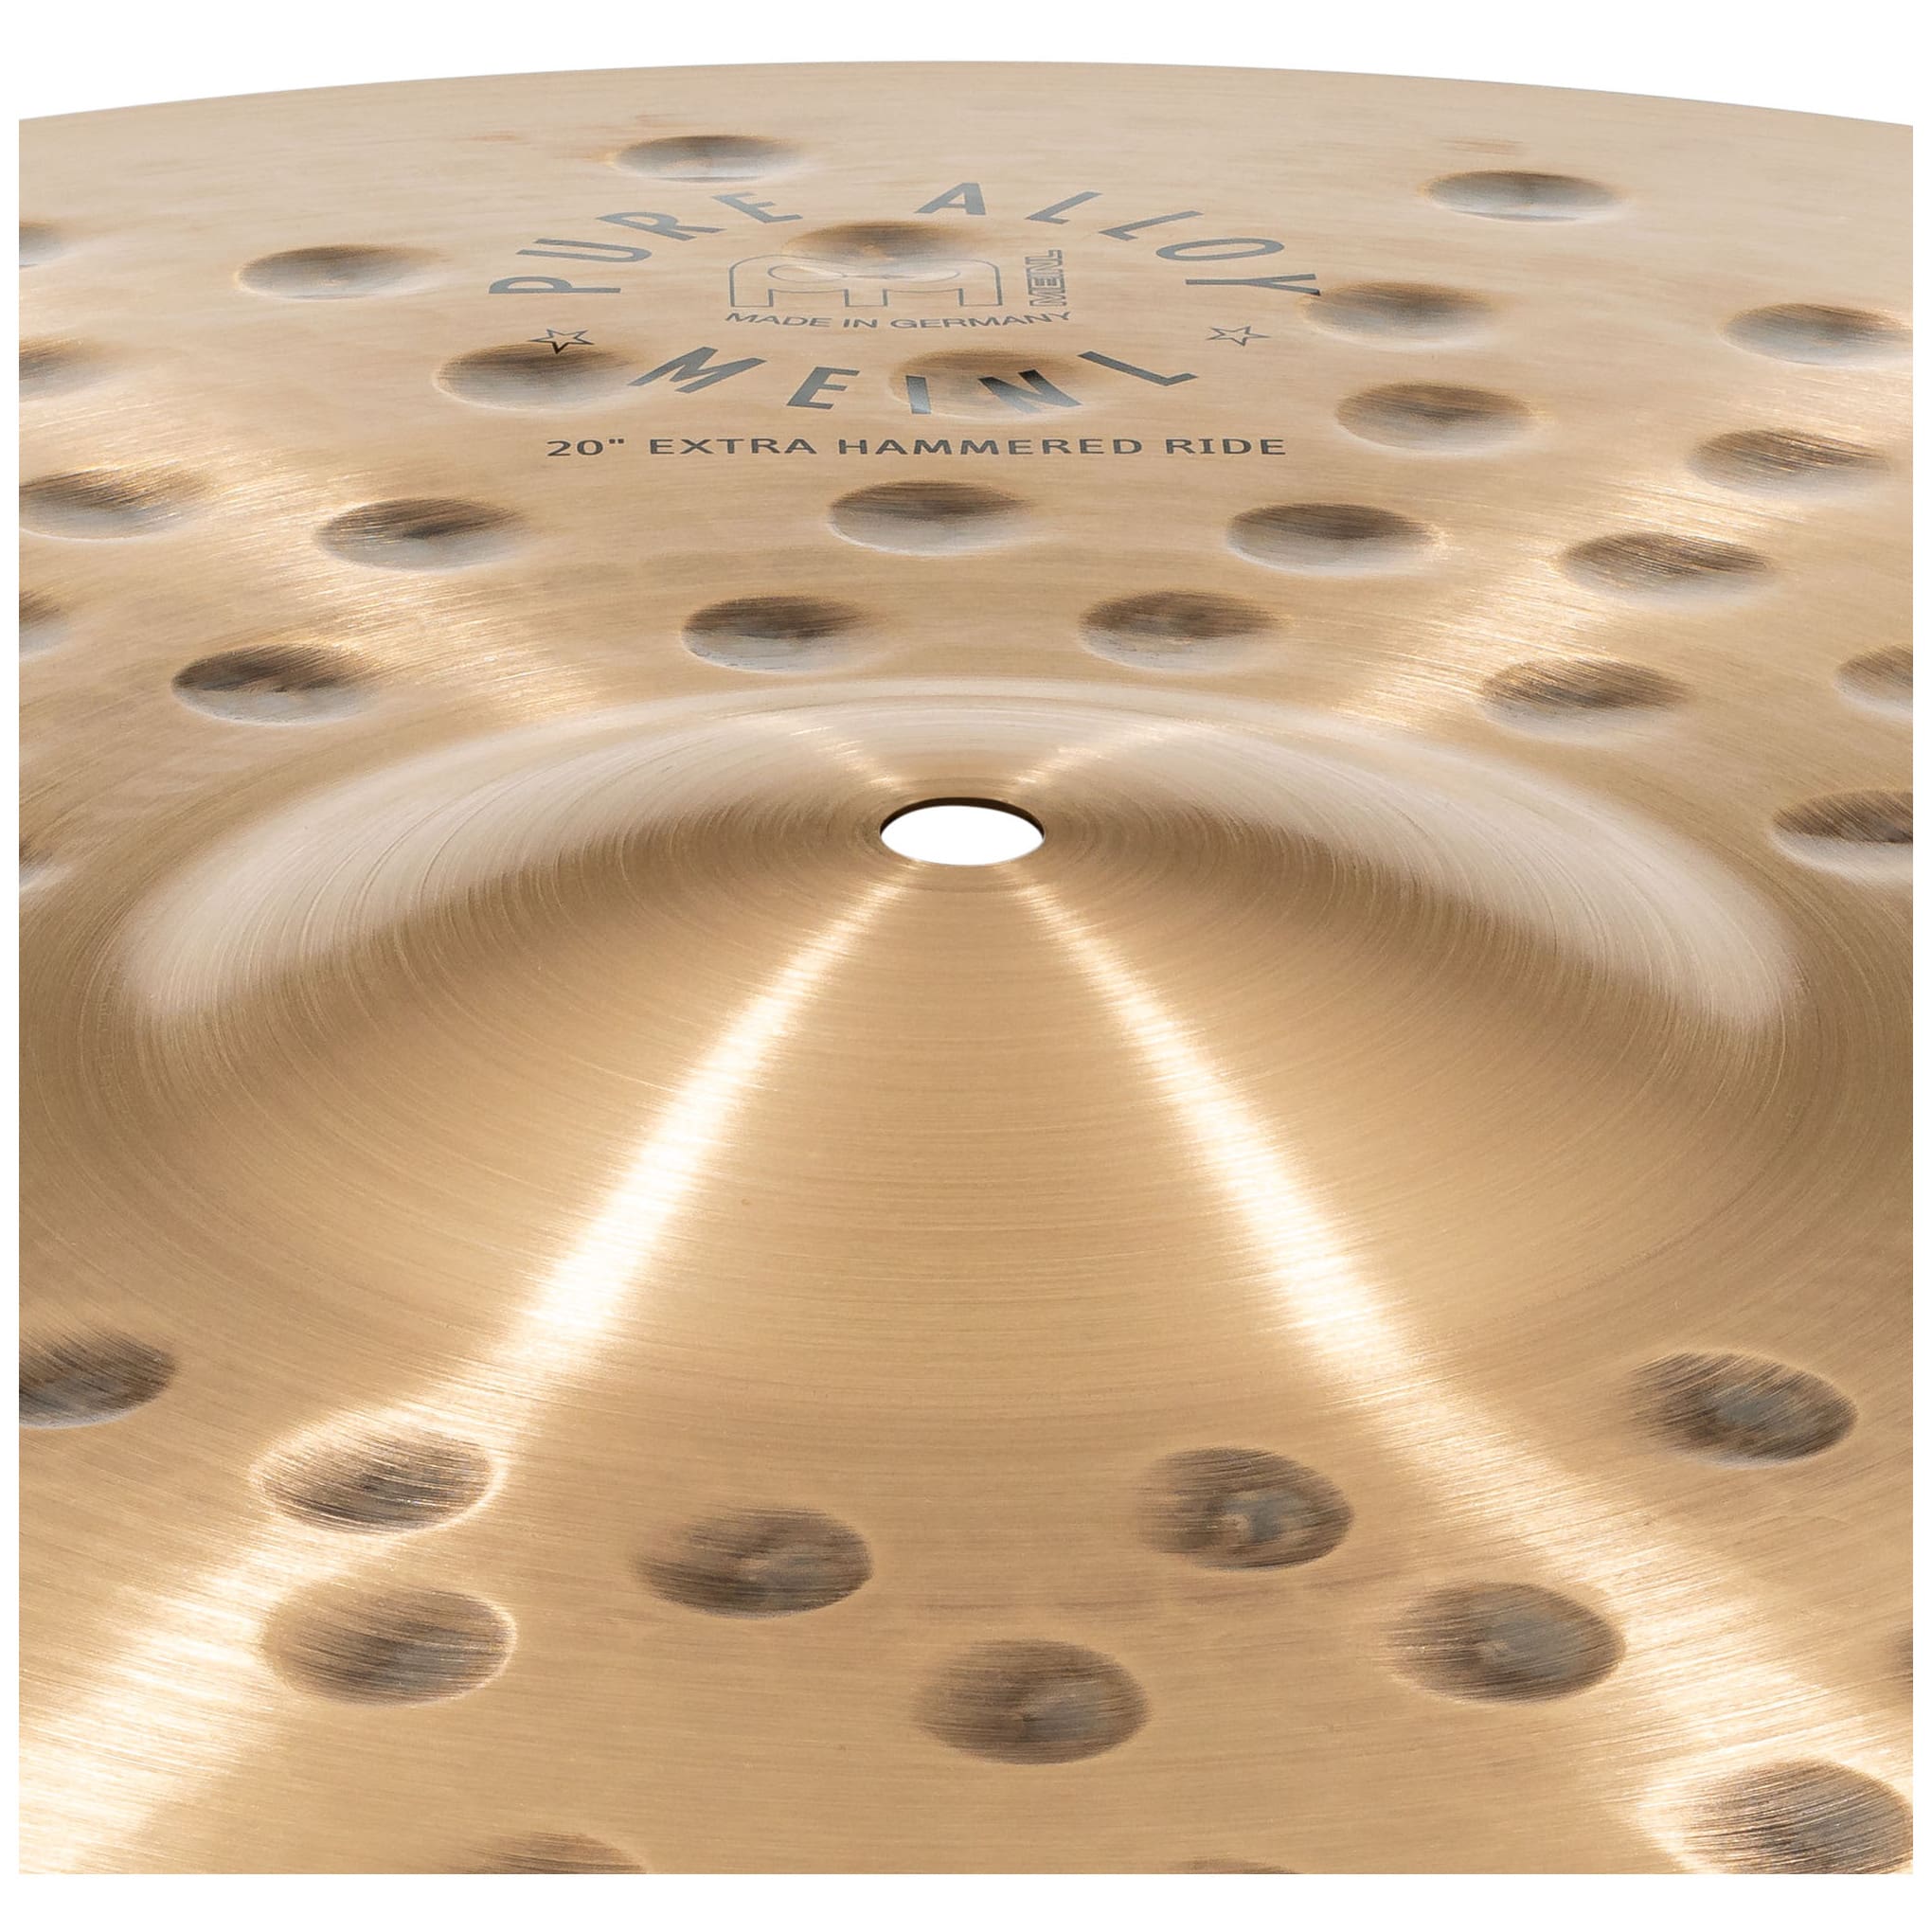 Meinl Cymbals PA20EHR - 20" Pure Alloy Extra Hammered Ride 8